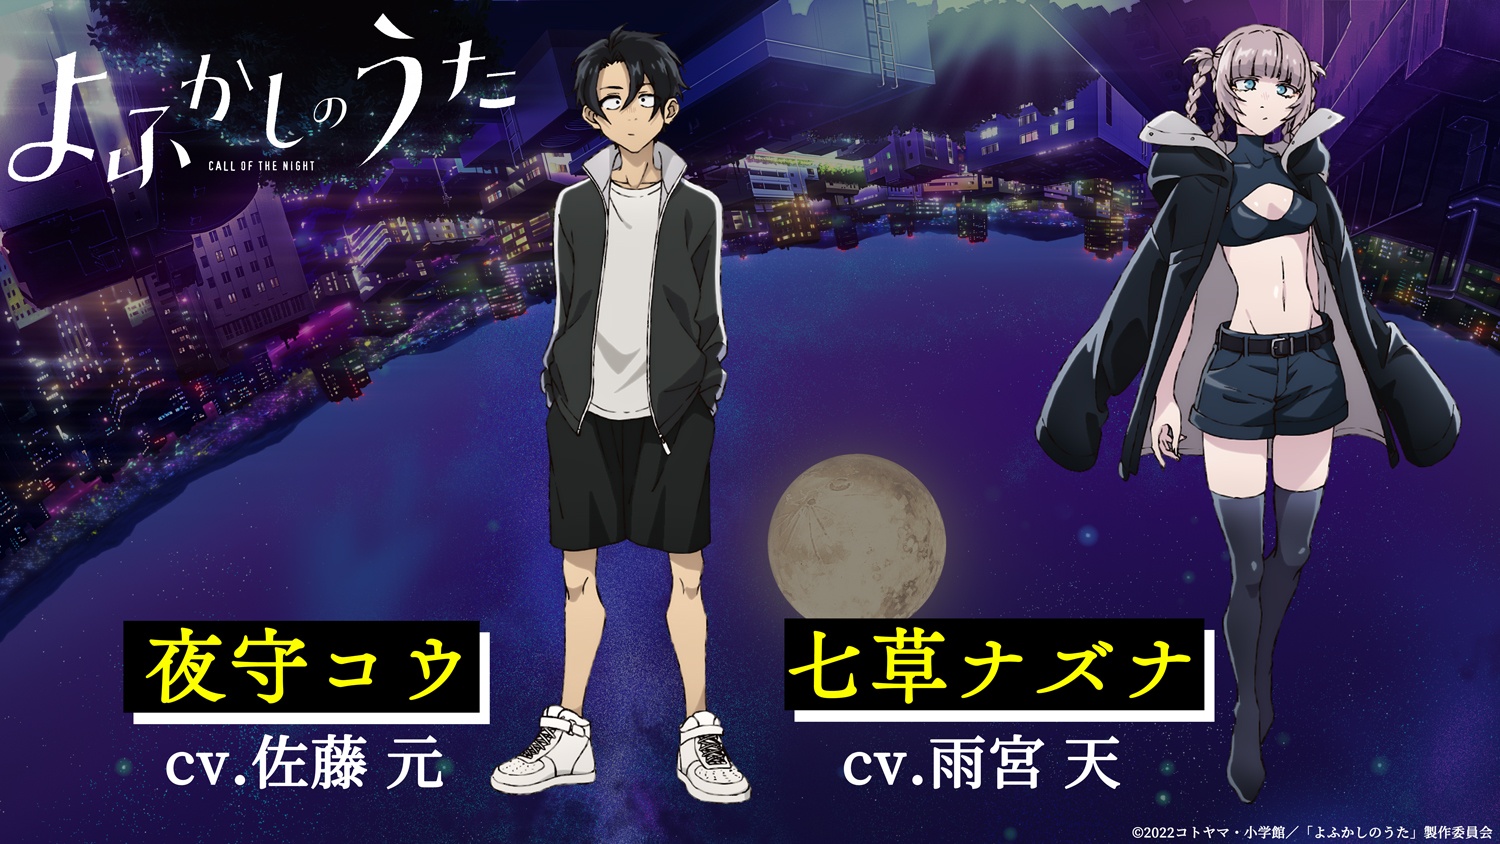 Call of the Night Releases Poster for New Anime